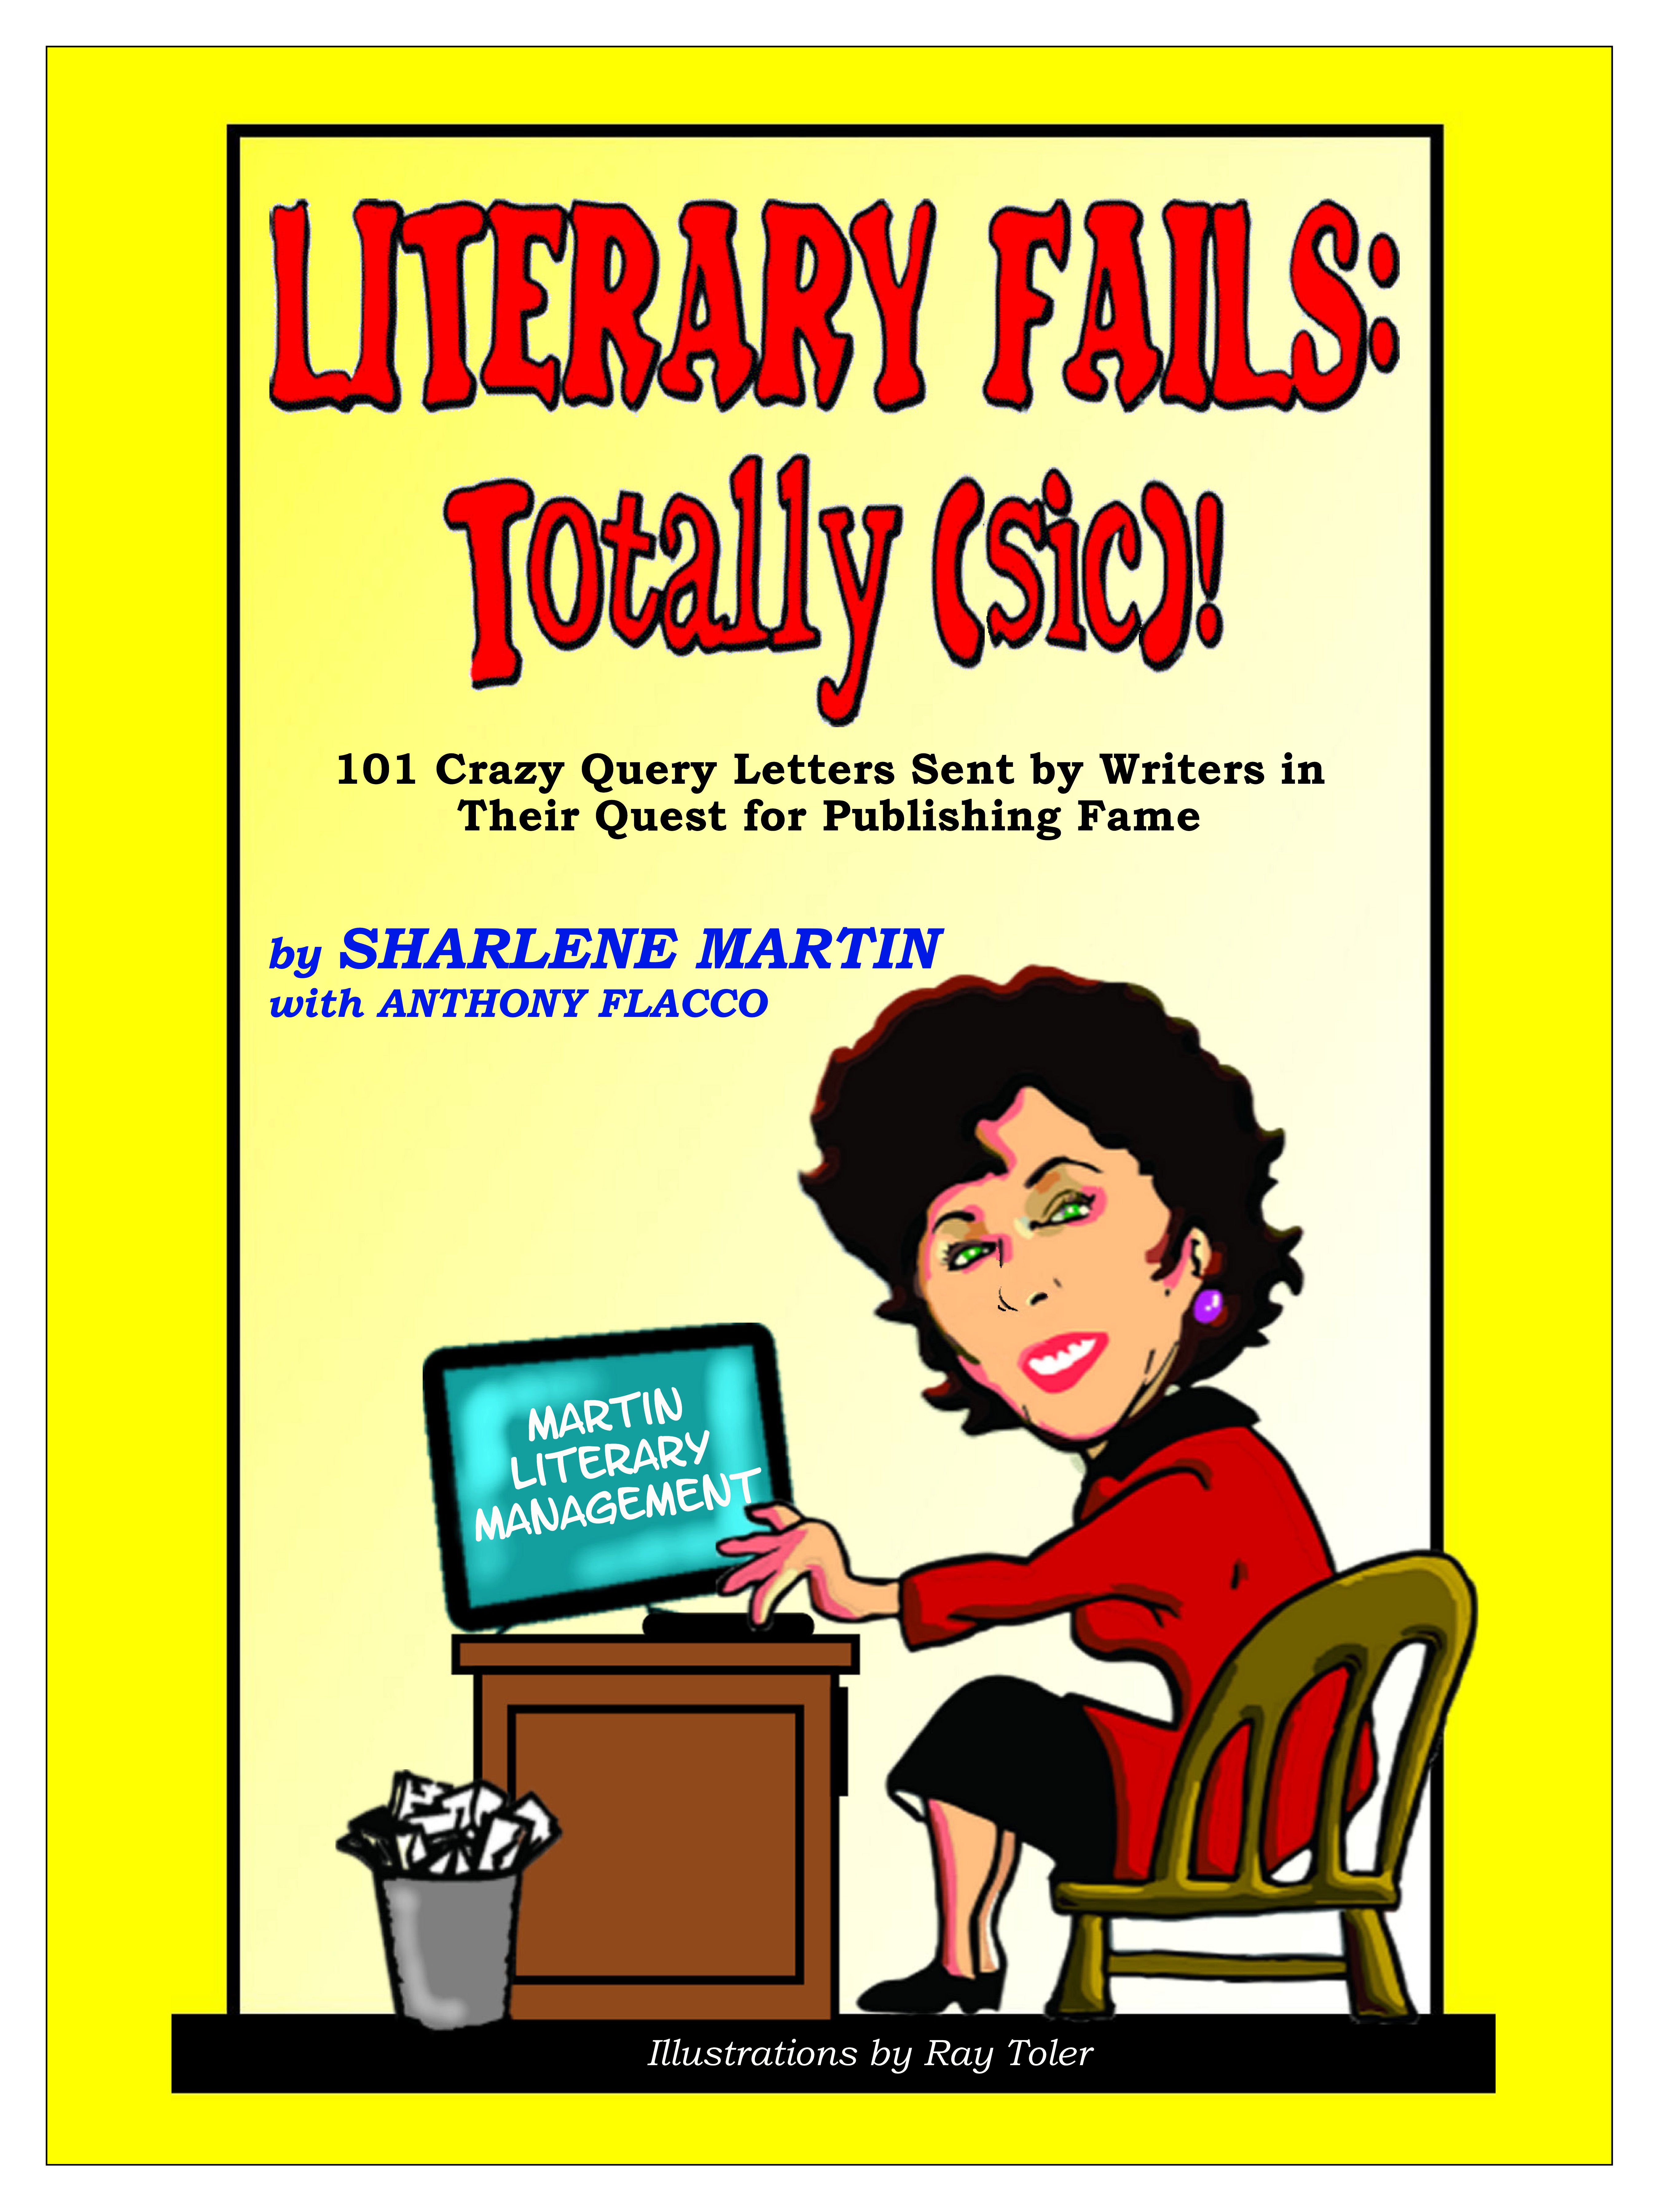 Literary Fails: Totally (sic)! By Sharlene Martin with Anthony Flacco